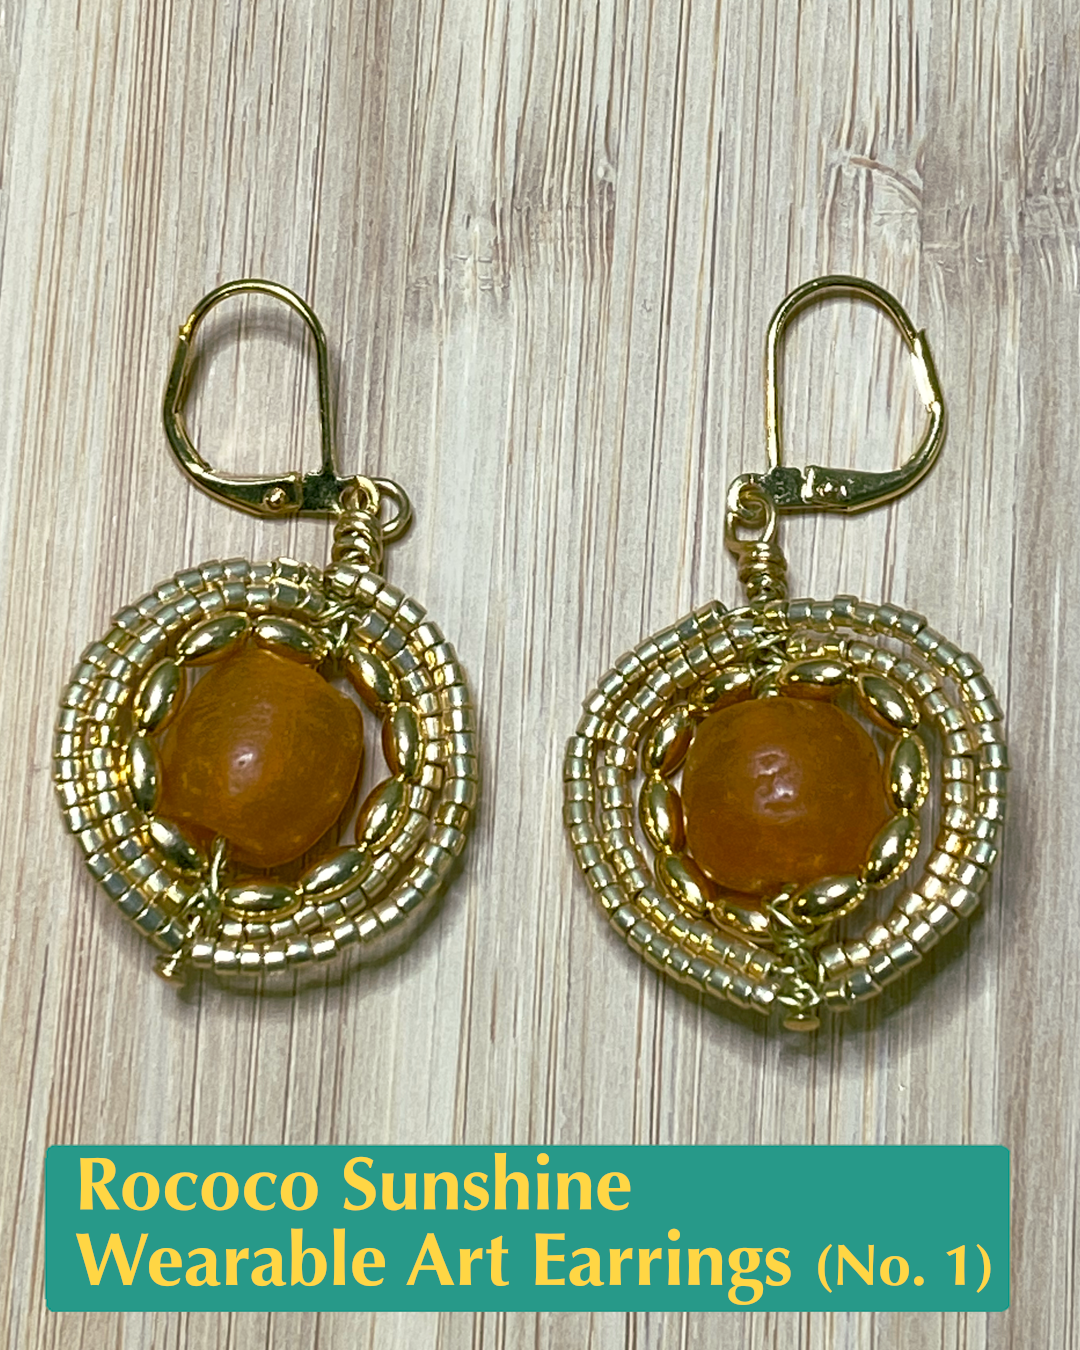 Handmade, wearable art earrings made from gold-colored metals featuring a large orange bead encircled by small gold beads